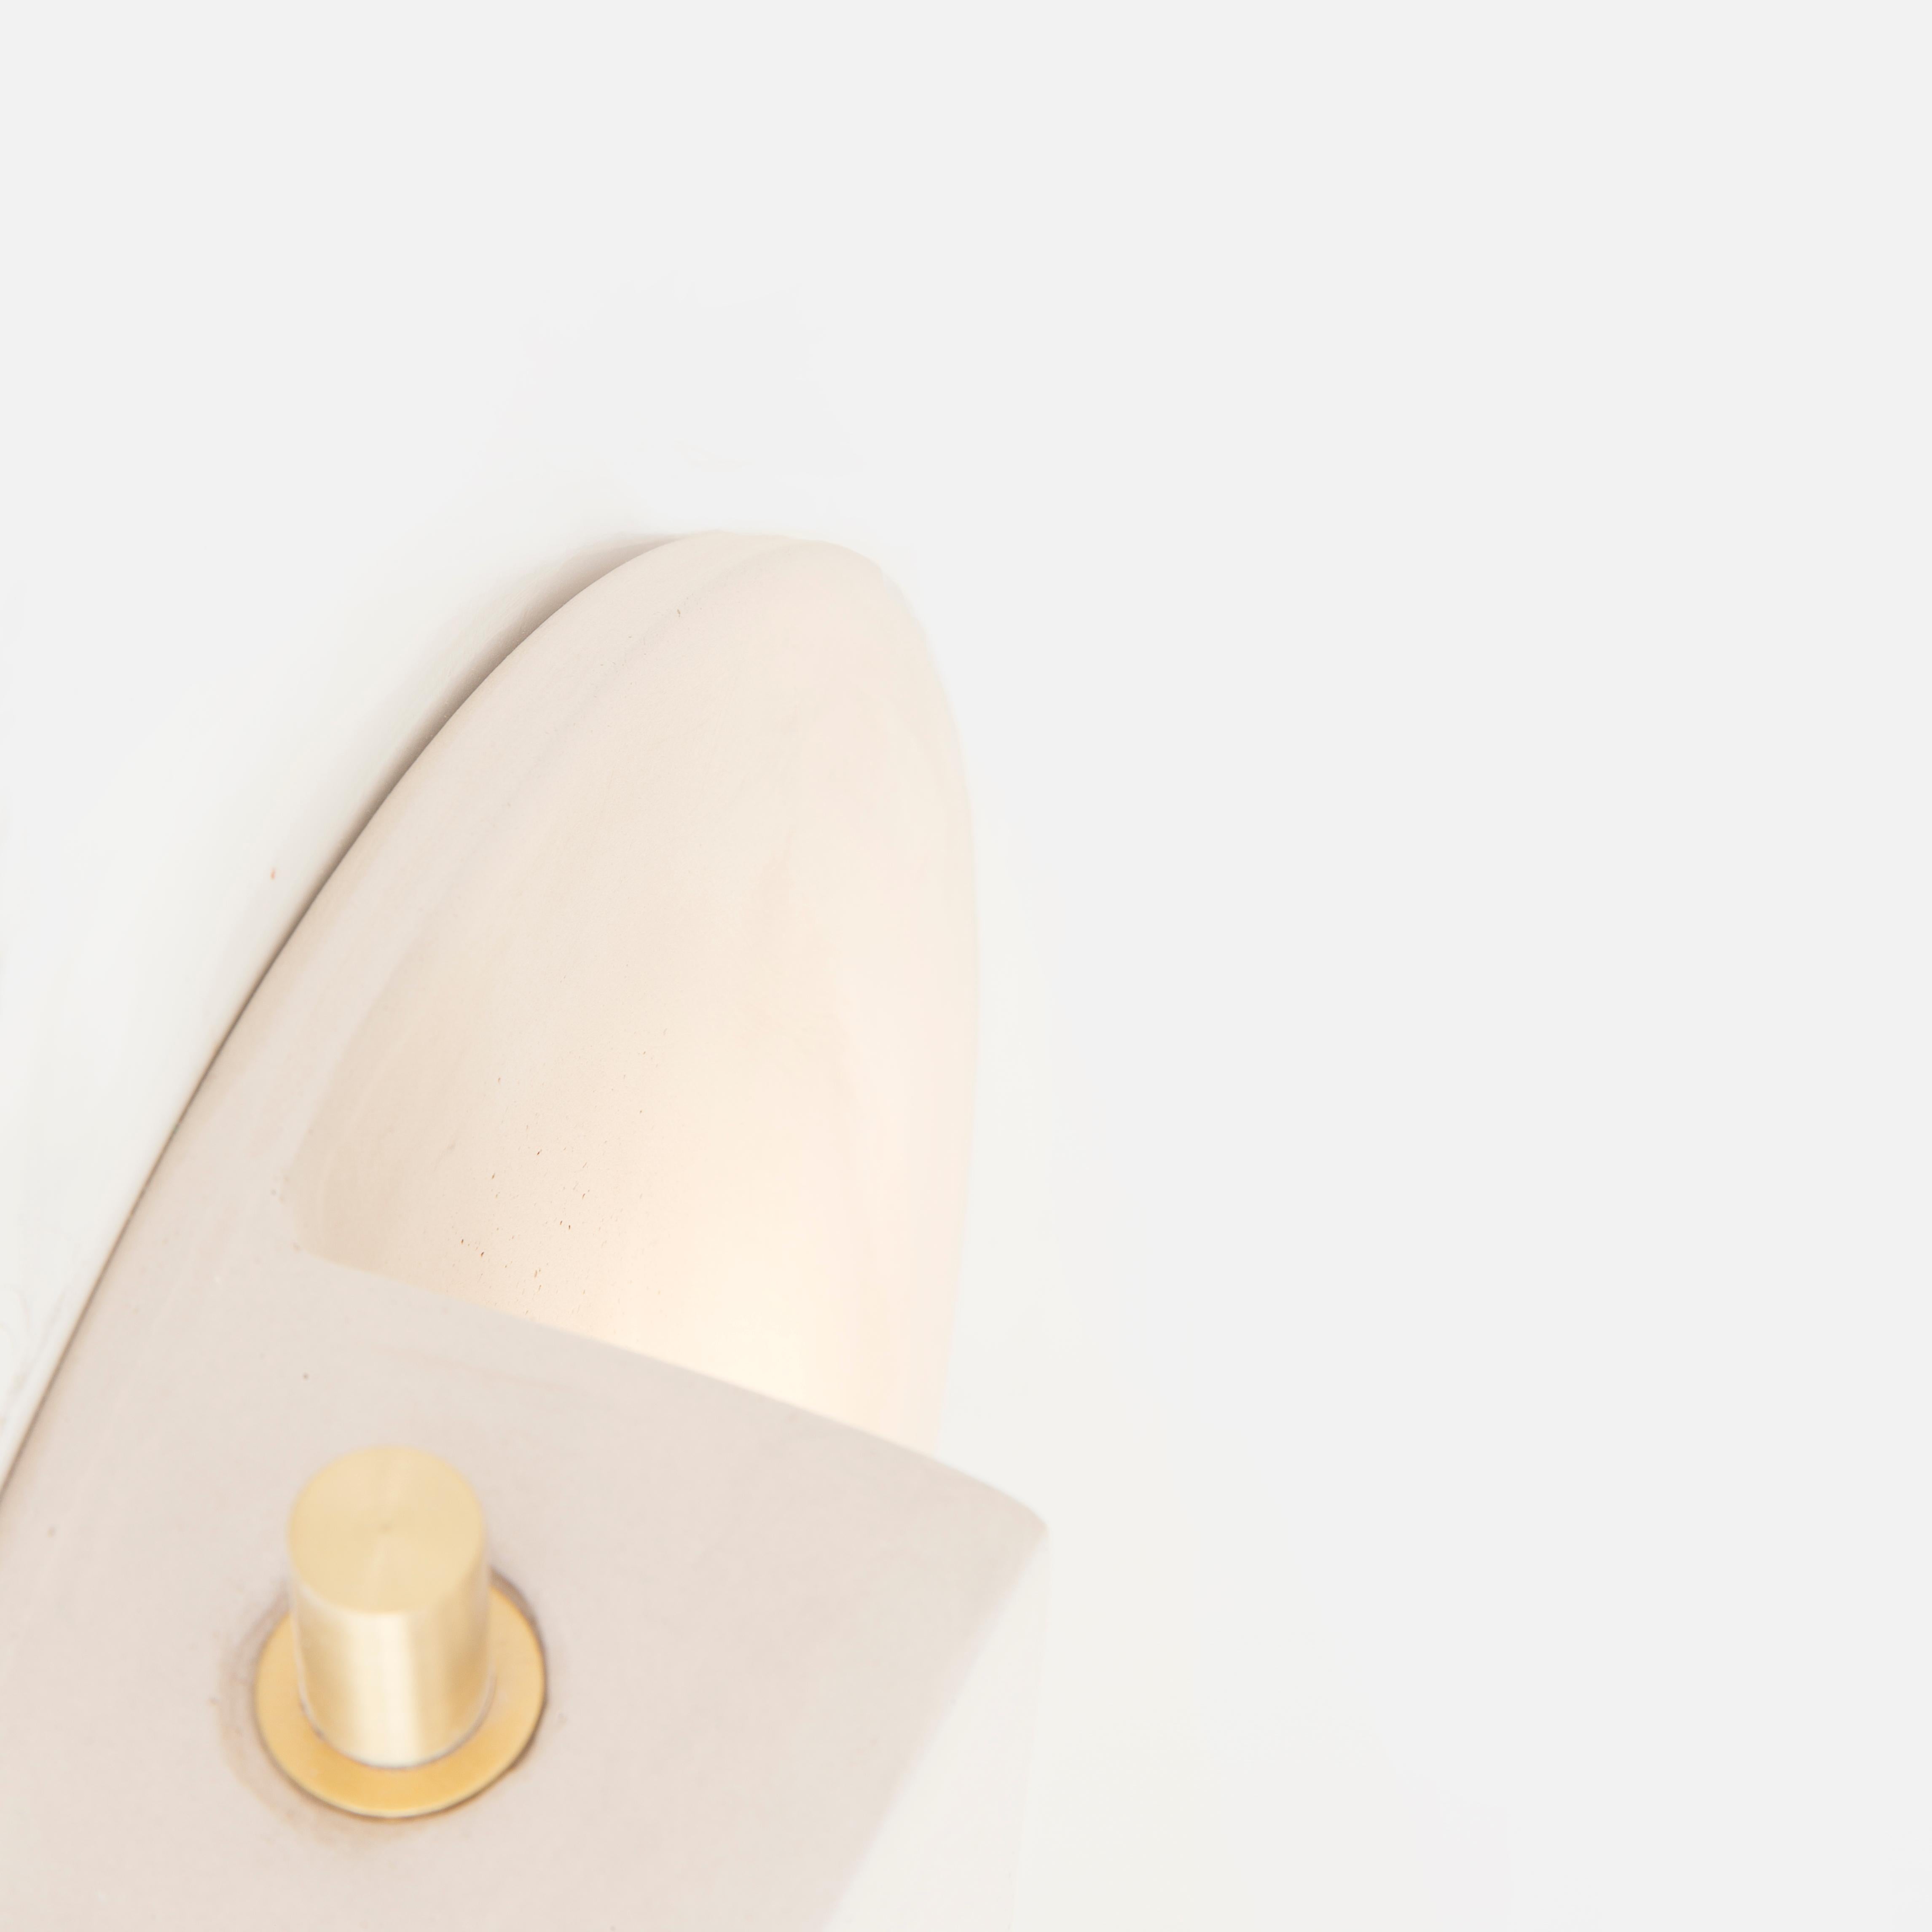 Brushed Handmade Minimalist Round wall light, Natural, Raw, Ceramic and Brass, Brazil For Sale